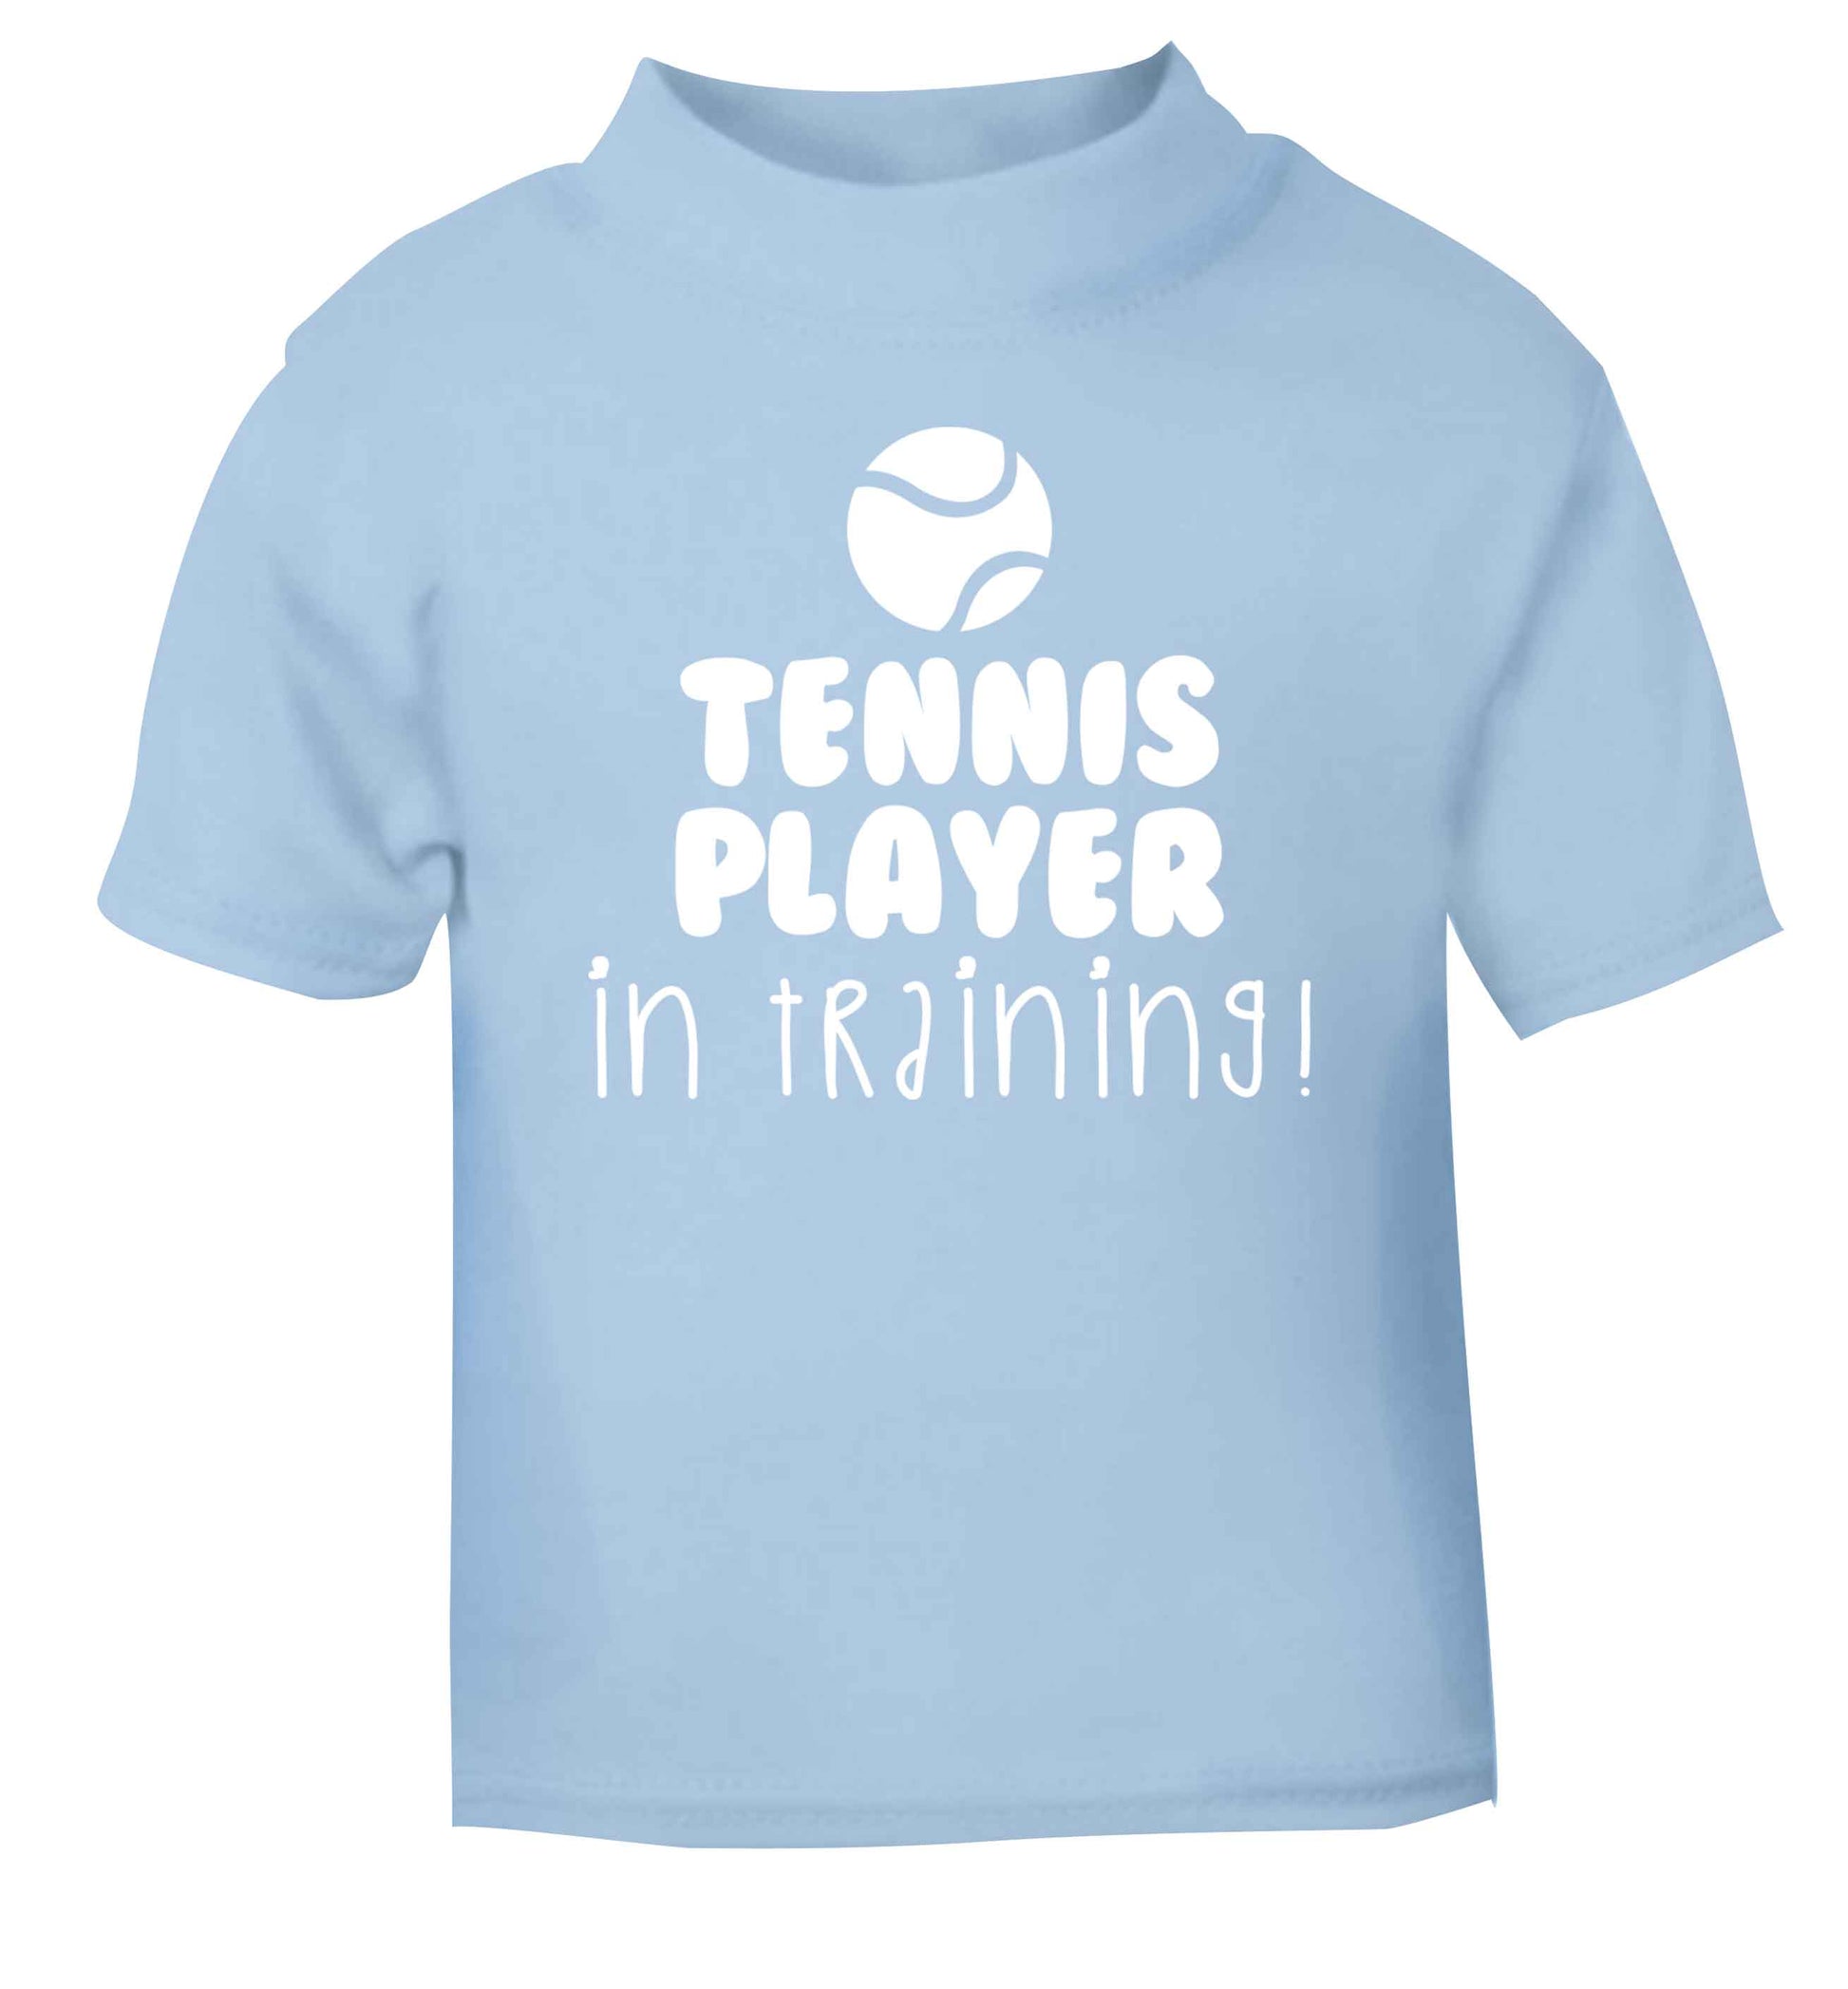 Tennis player in training light blue Baby Toddler Tshirt 2 Years